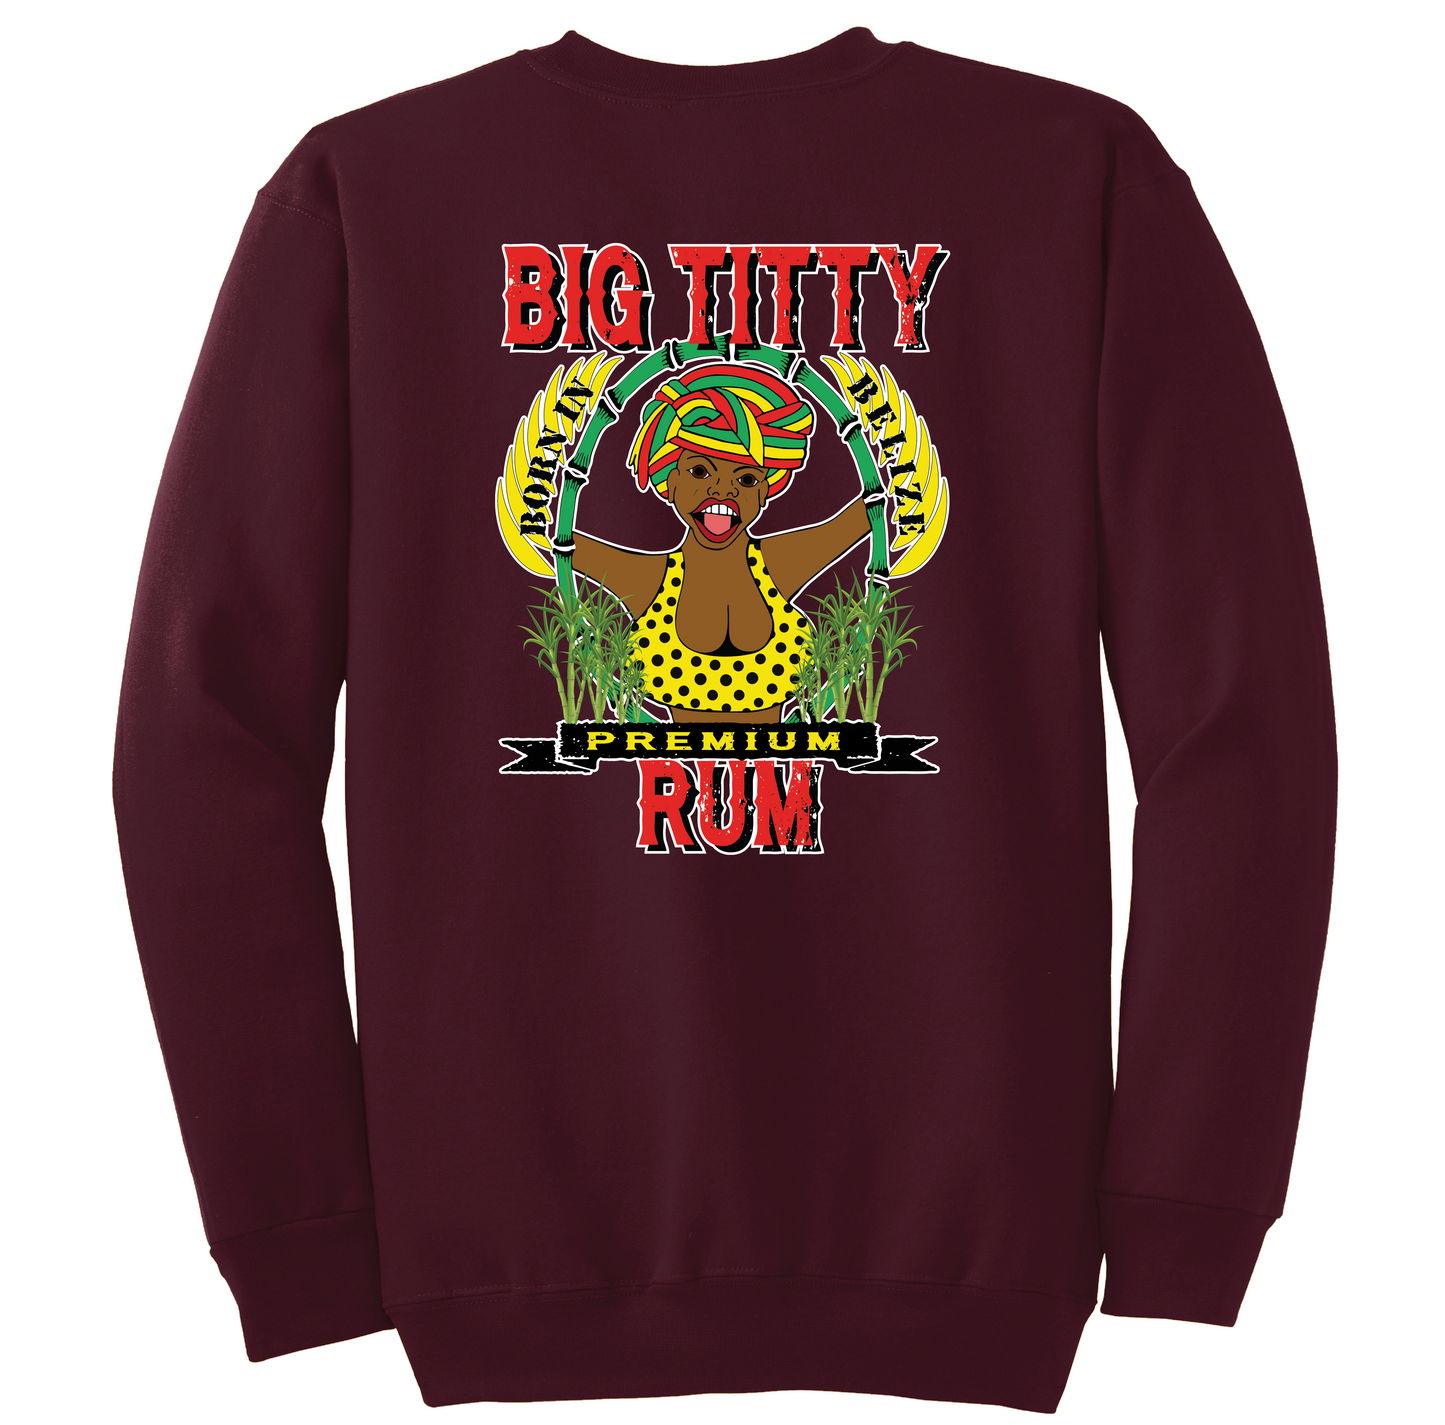 Big Titty Rum Crewneck - Small logo on front and large on back